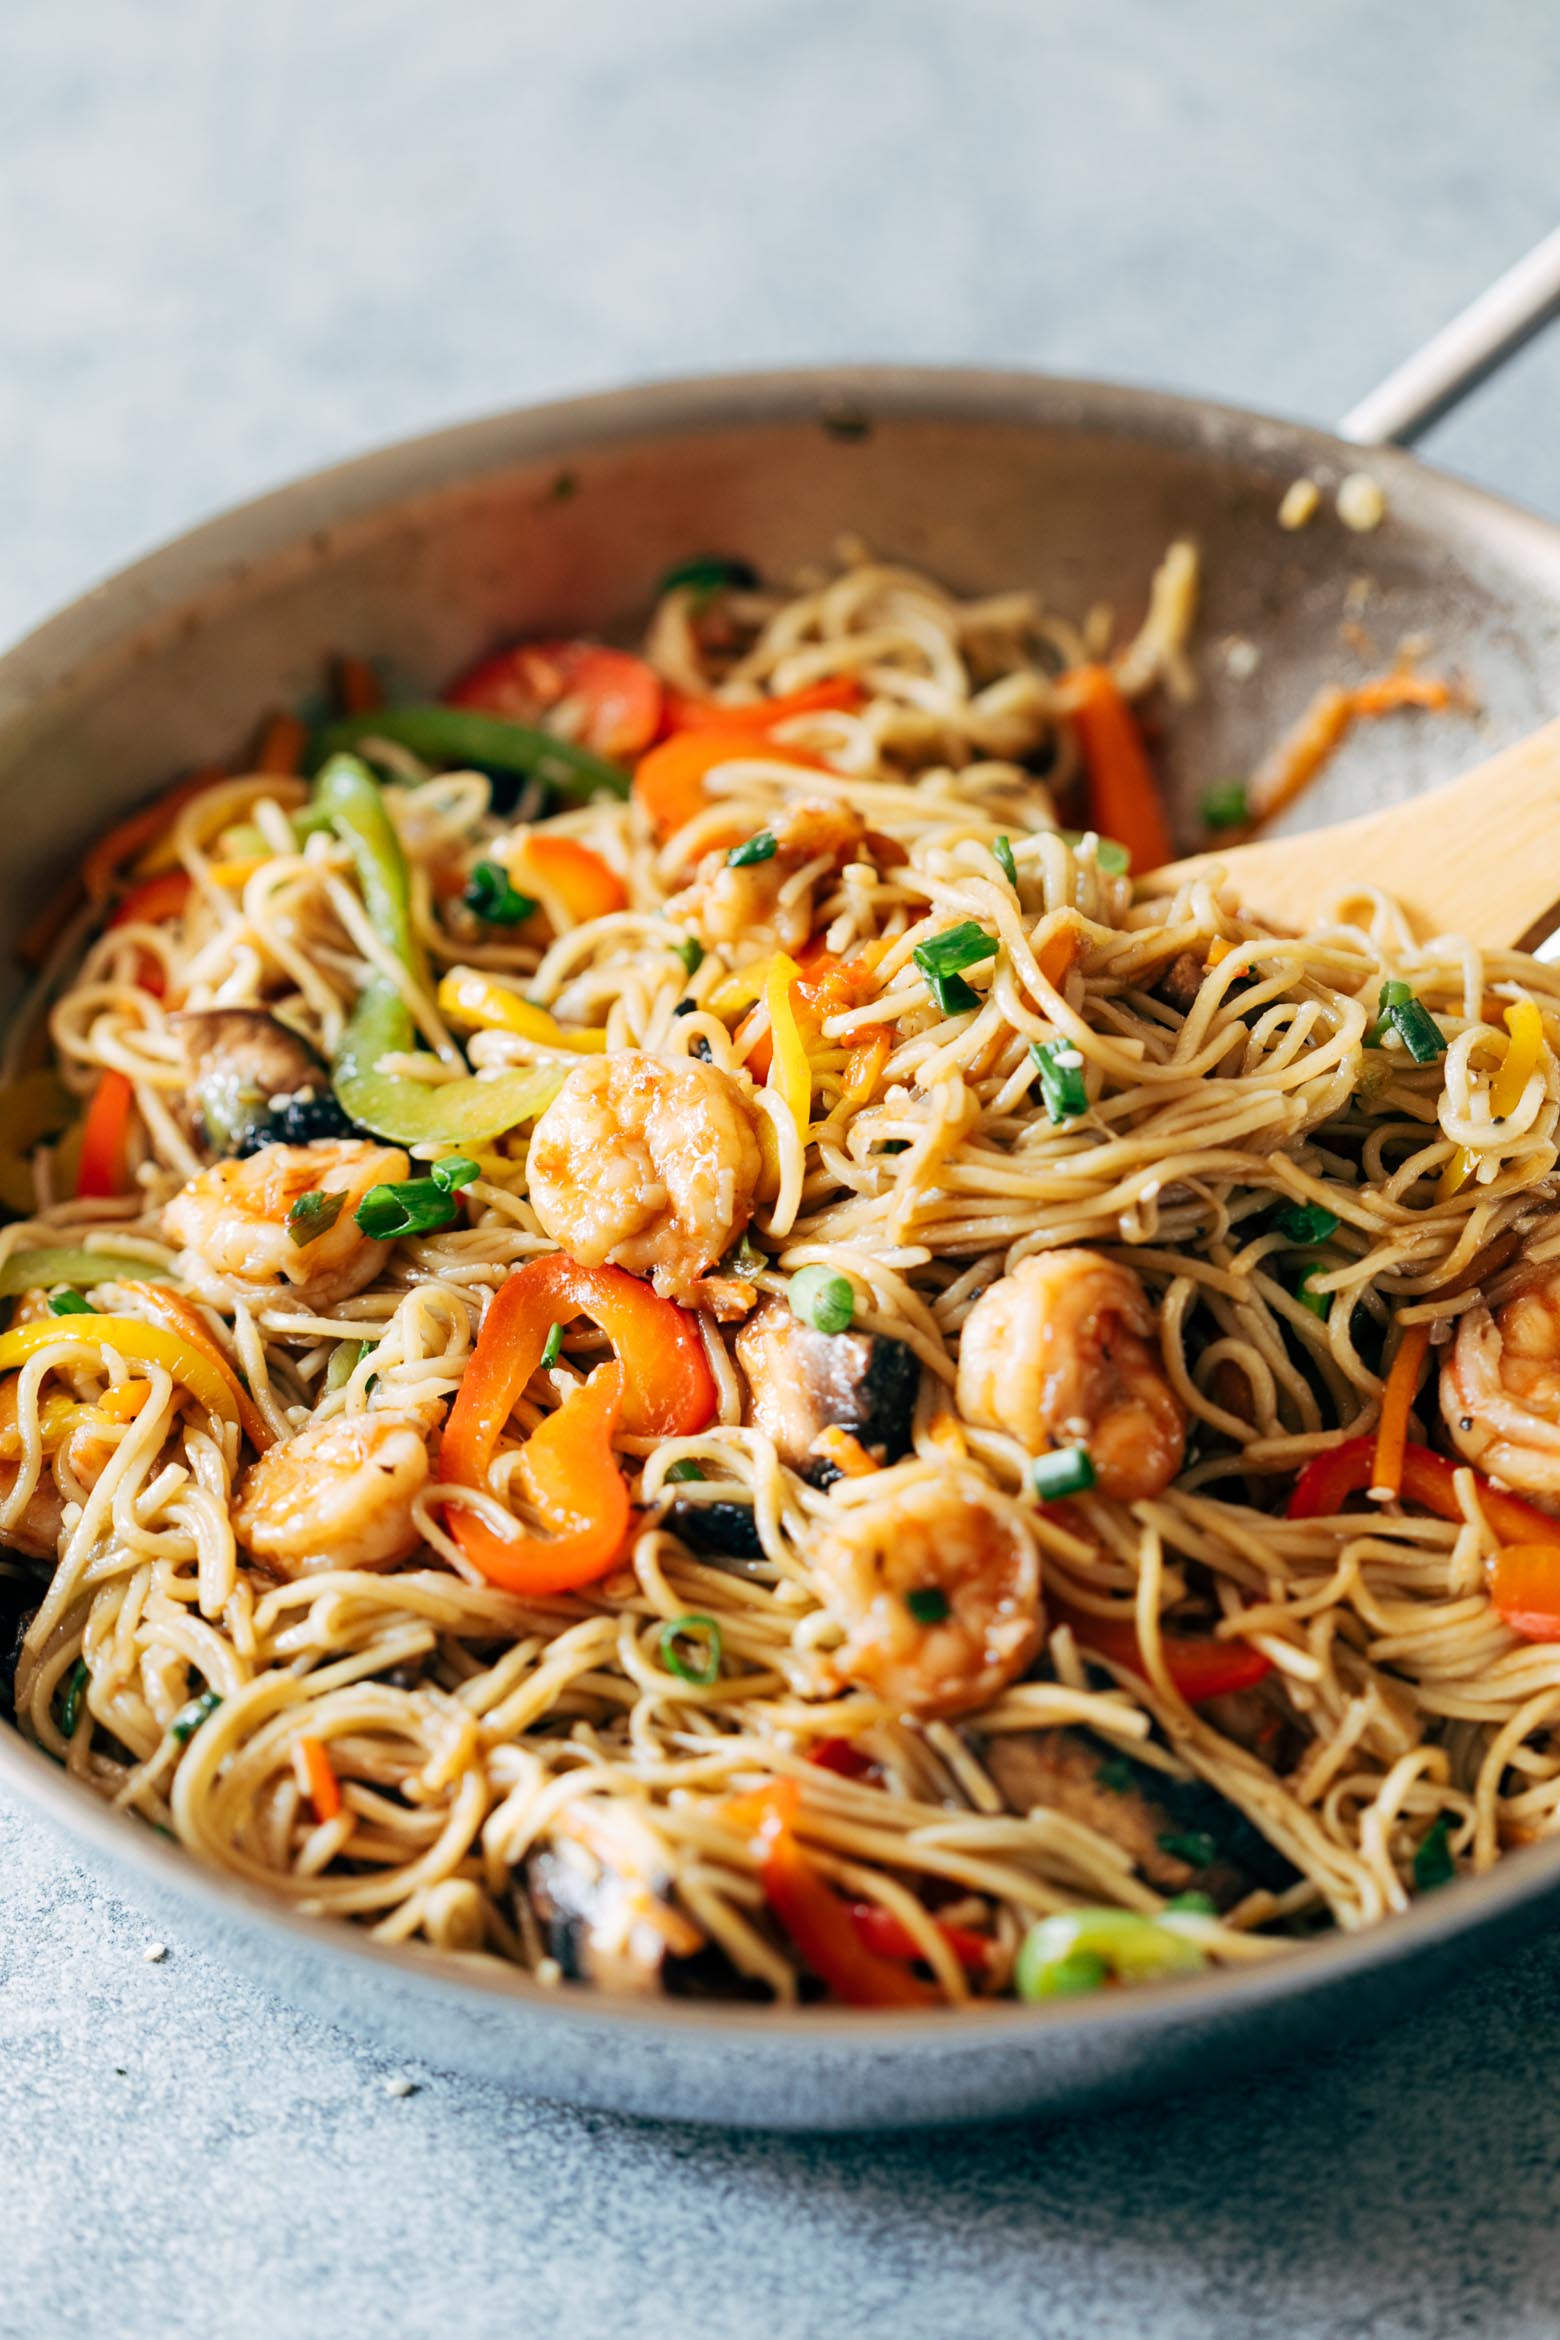 Shrimp Chow Mein is an easy, one pot meal thats loaded with shrimp, fresh vegetables and flavour. Its the best way to get weeknight dinner on the table in under 30 minutes and is better than takeout!